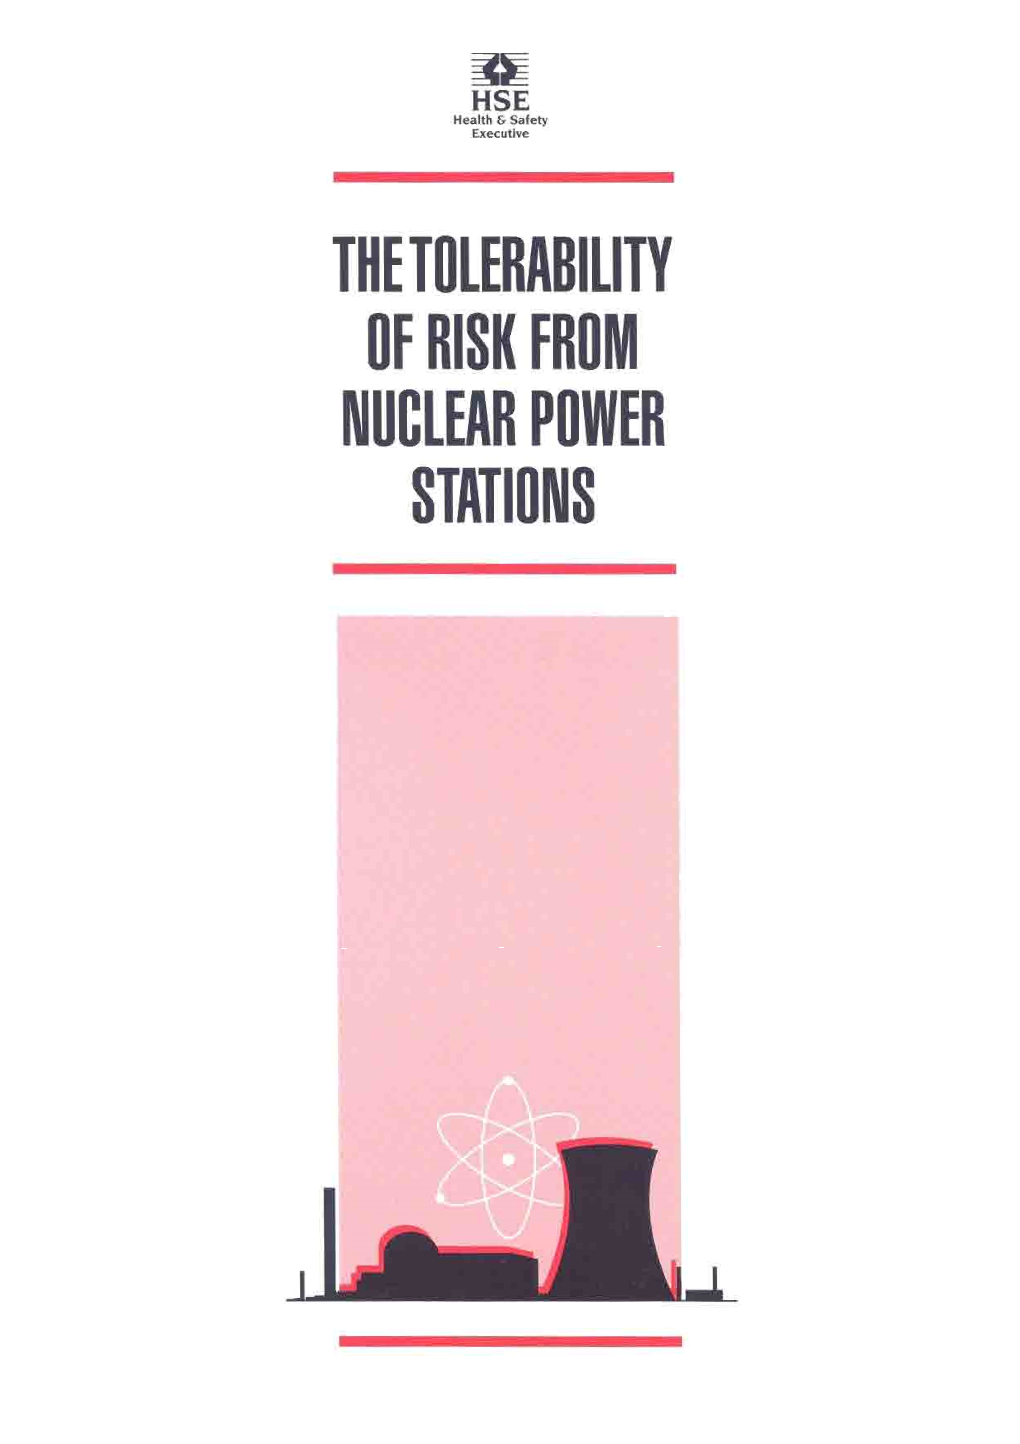 The Tolerability of Risk from Nuclear Power Stations